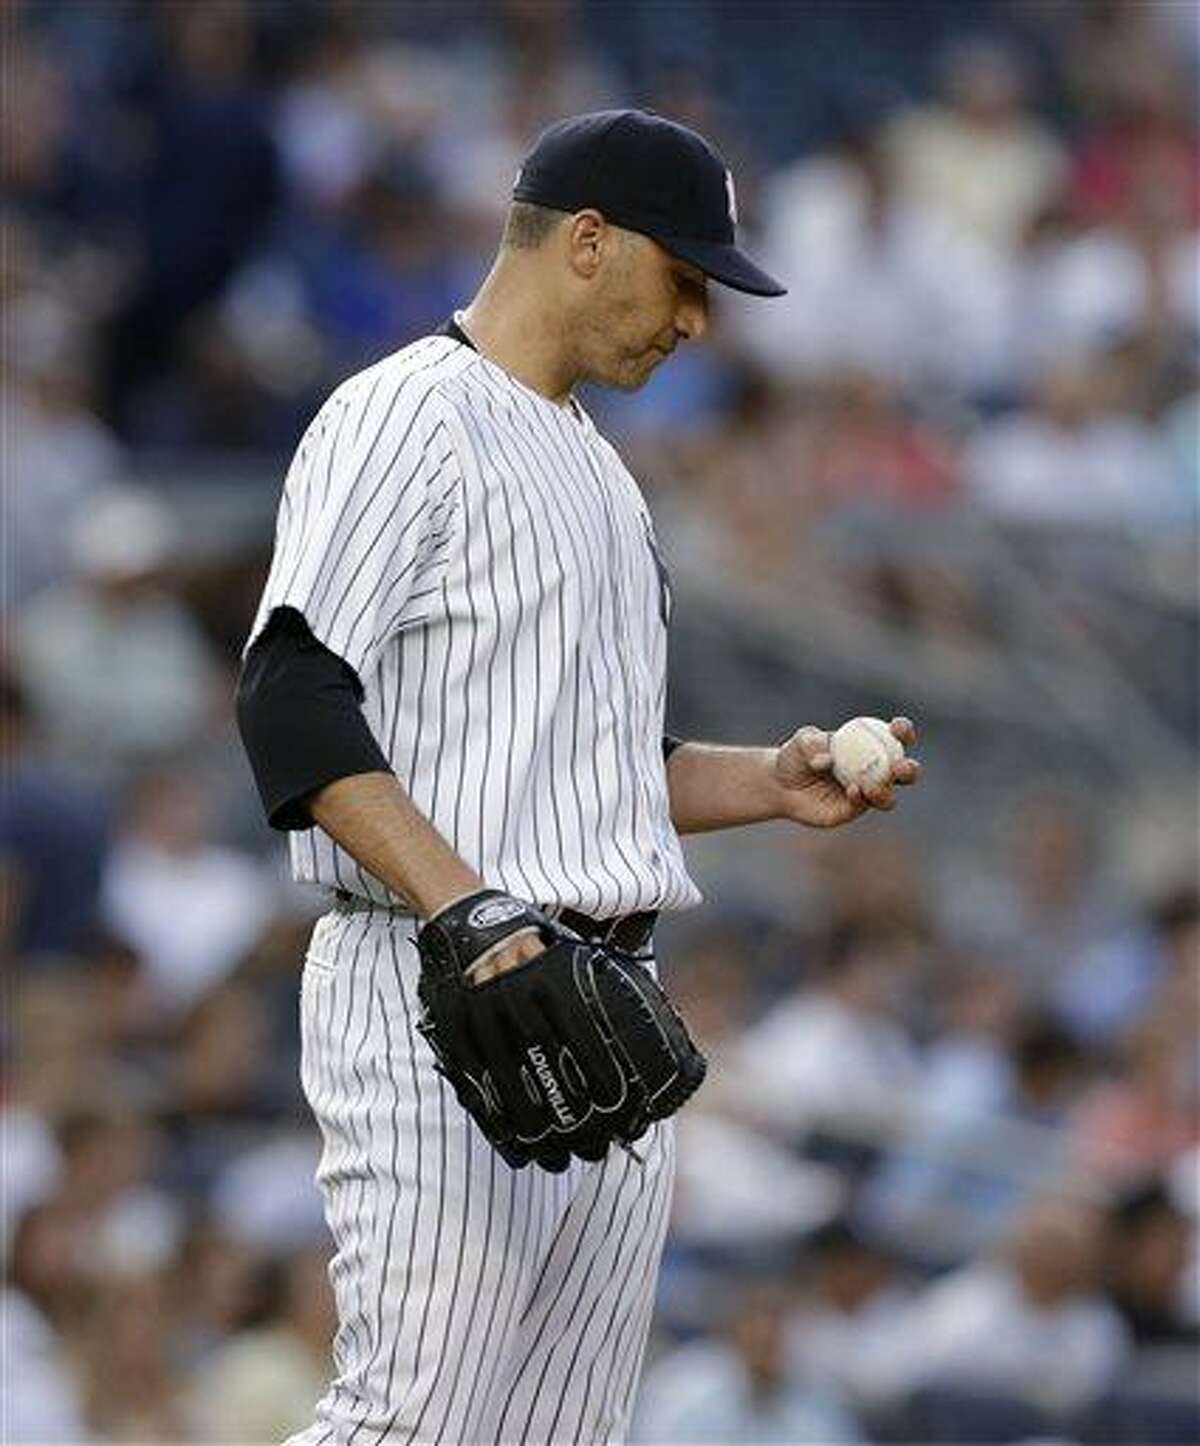 New York Yankees starting pitcher Andy Pettitte looks at the ball after allowing four runs to the Texas Rangers in the third inning of a baseball game, Wednesday, June 26, 2013, in New York. (AP Photo/Kathy Willens)